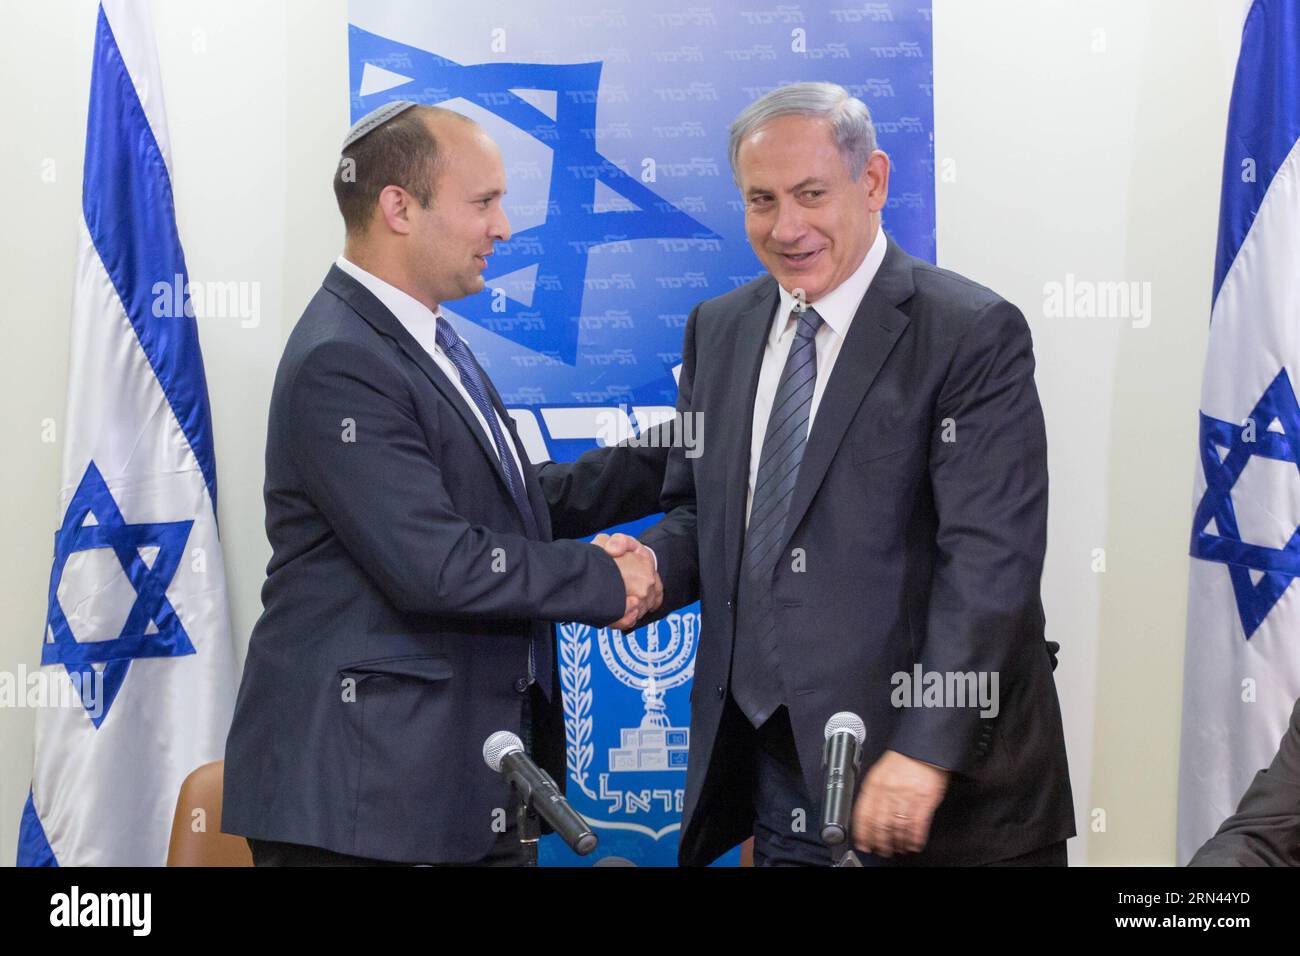 (150507) -- JERUSALEM, May 6, 2015 -- Israeli Prime Minister Benjamin Netanyahu (R) shakes hands with Jewish Home party leader Naftali Bennett at a press conference in Jerusalem May 6, 2015. Benjamin Netanyahu managed to clinch a deal with the nationalist Jewish Home party late Wednesday night, securing a new ruling coalition with a tiny majority in the 120-member parliament. ) ISRAEL-NEW COALITION-PRESS CONFERENCE JINI PUBLICATIONxNOTxINxCHN   Jerusalem May 6 2015 Israeli Prime Ministers Benjamin Netanyahu r Shakes Hands With Jewish Home Party Leader Naftali Bennett AT a Press Conference in J Stock Photo